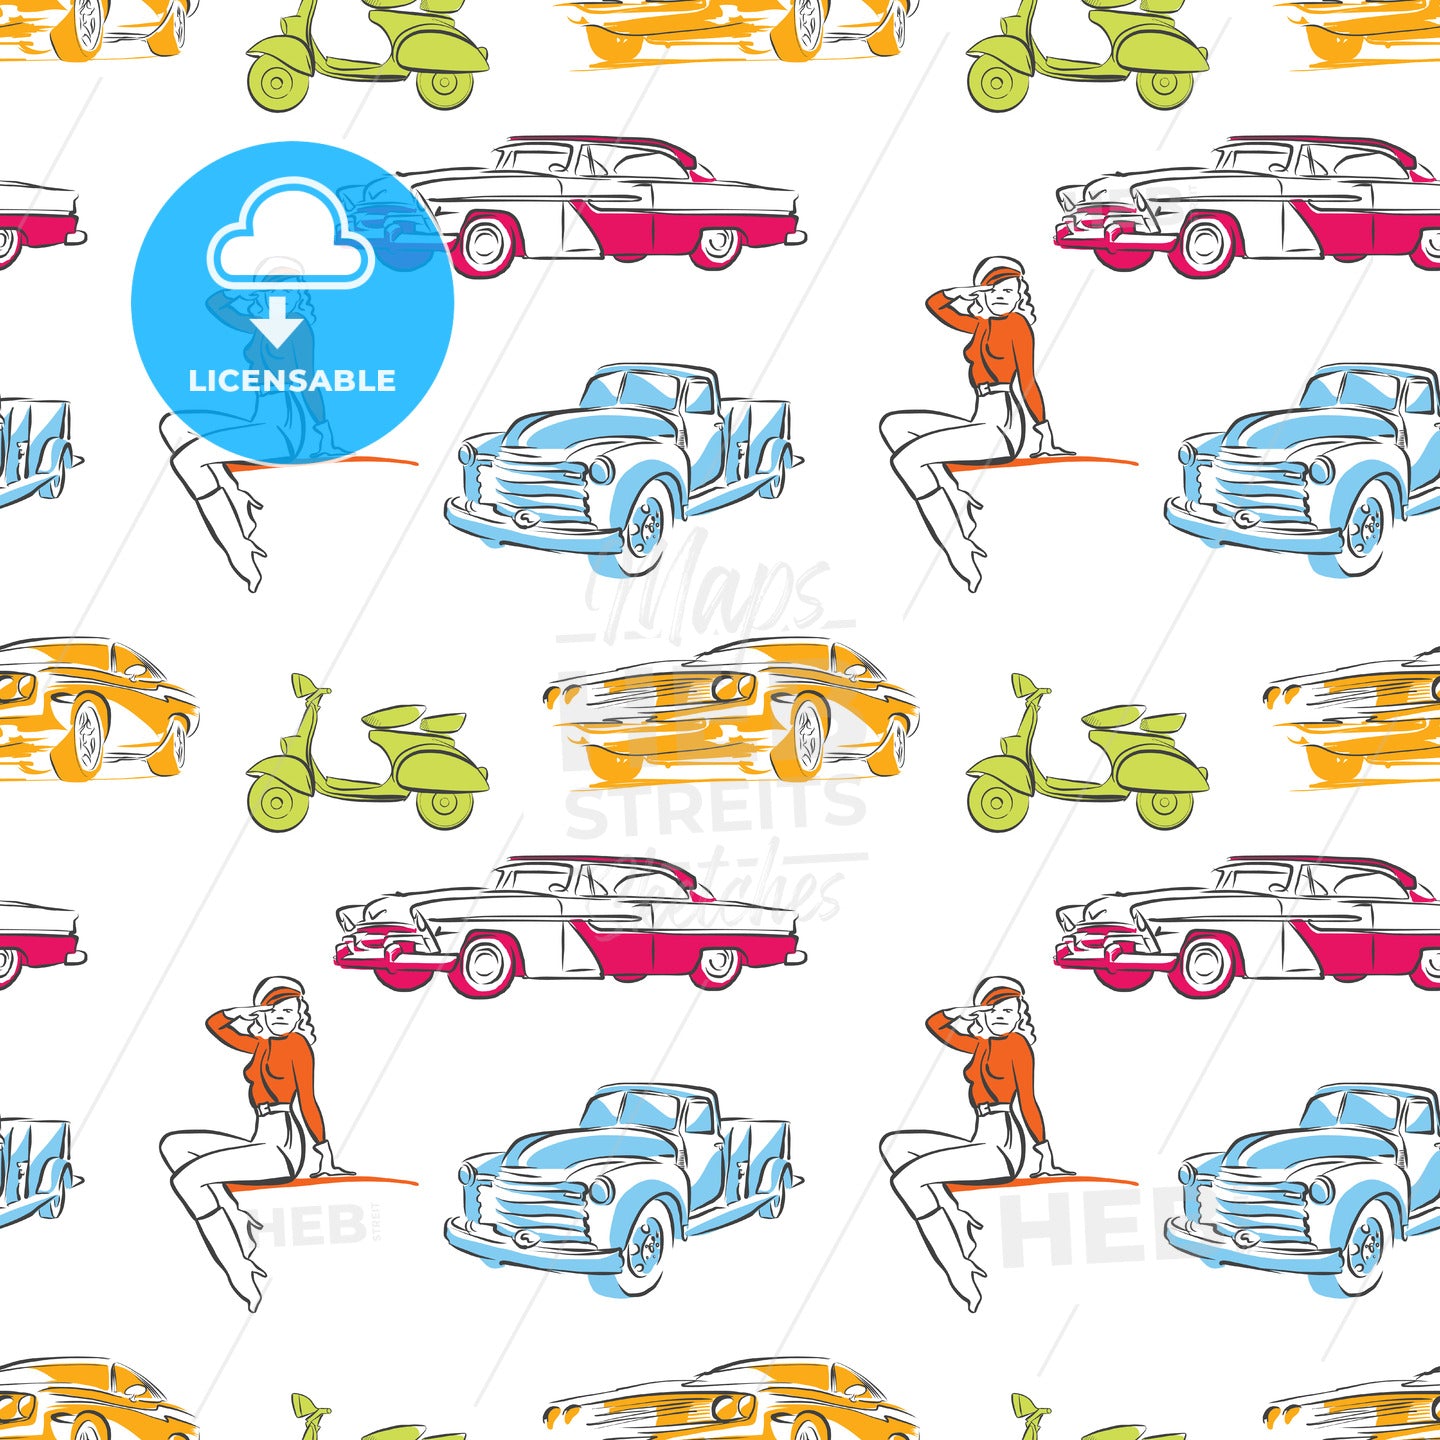 Vintage cars seamless pattern – instant download